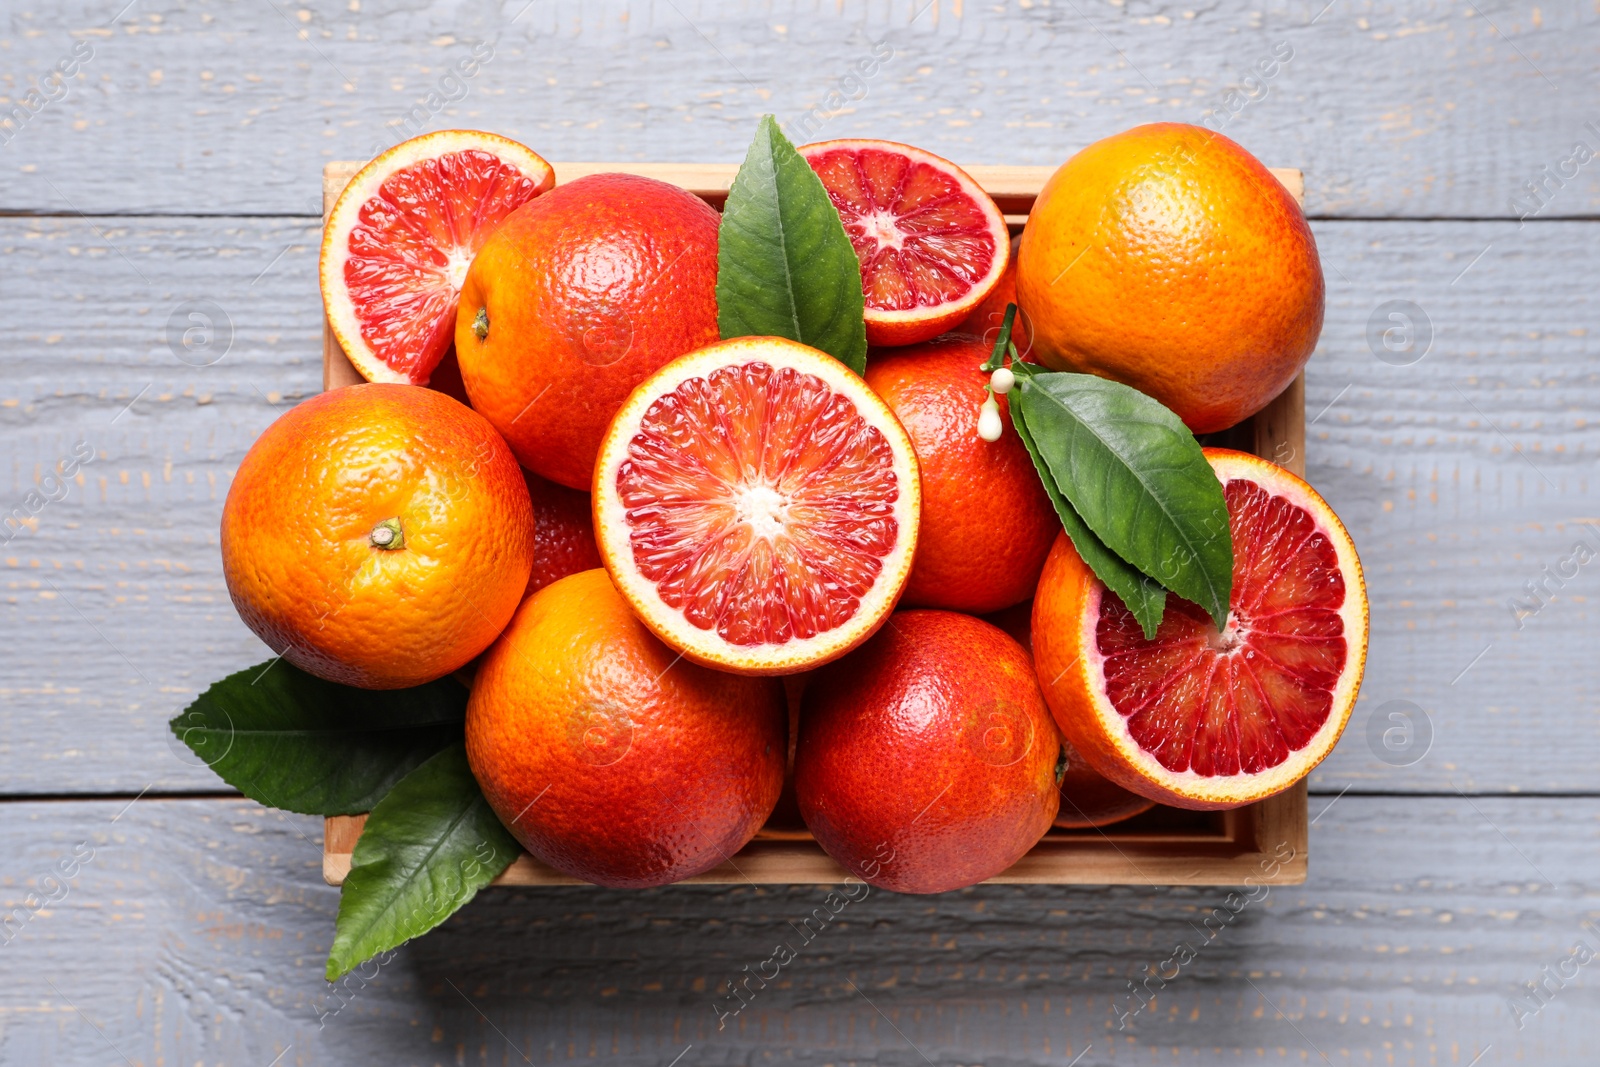 Photo of Crate of ripe red oranges and green leaves on grey wooden table, top view